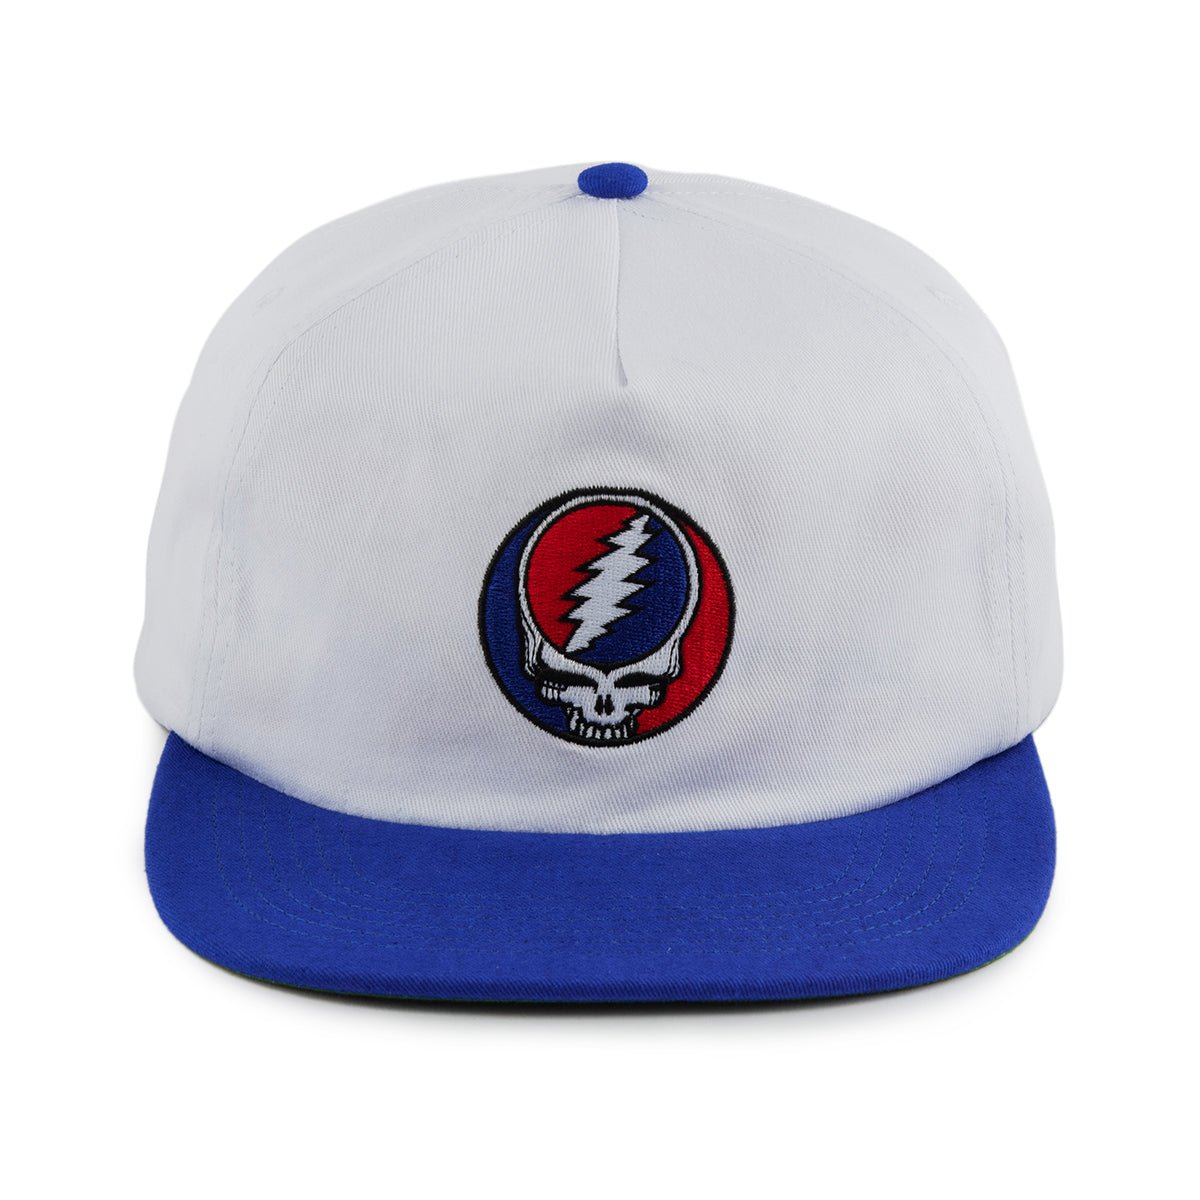 Grateful Dead x TGR Latvala Steal Your Face - Teton Gravity Research